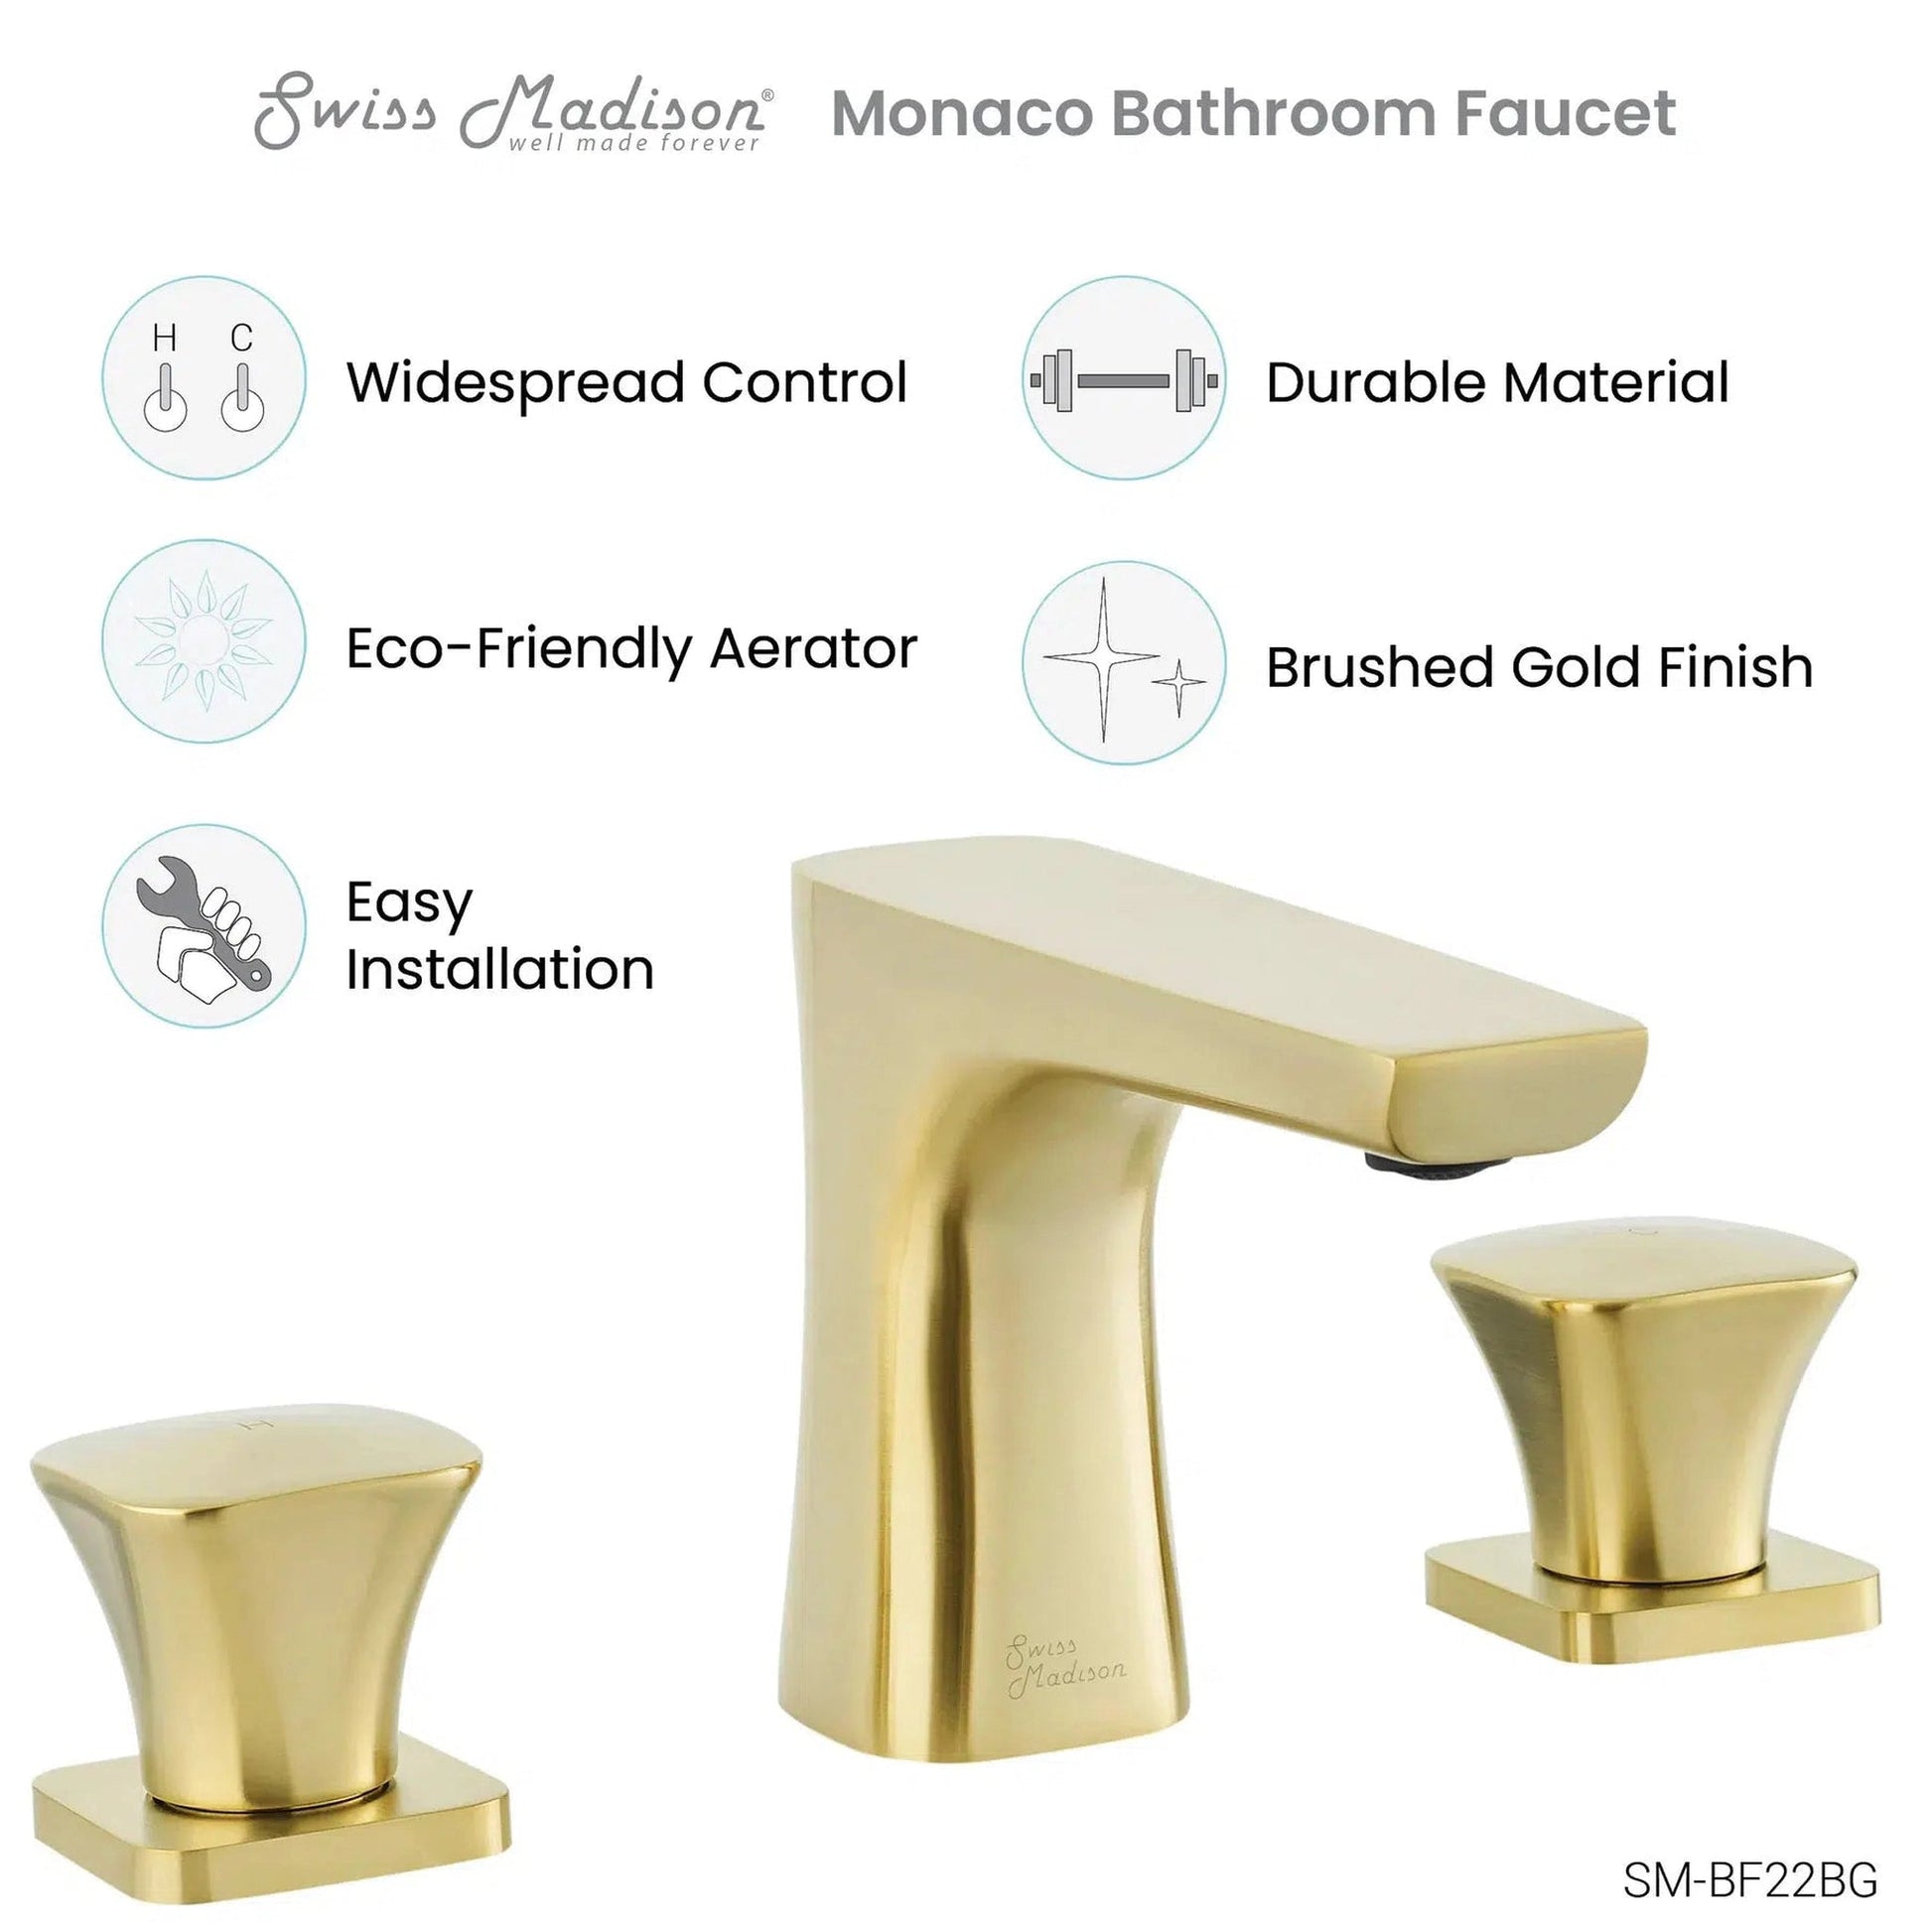 Swiss Madison Monaco 8" Brushed Gold Widespread Bathroom Faucet With Knob Handles and 1.2 GPM Flow Rate